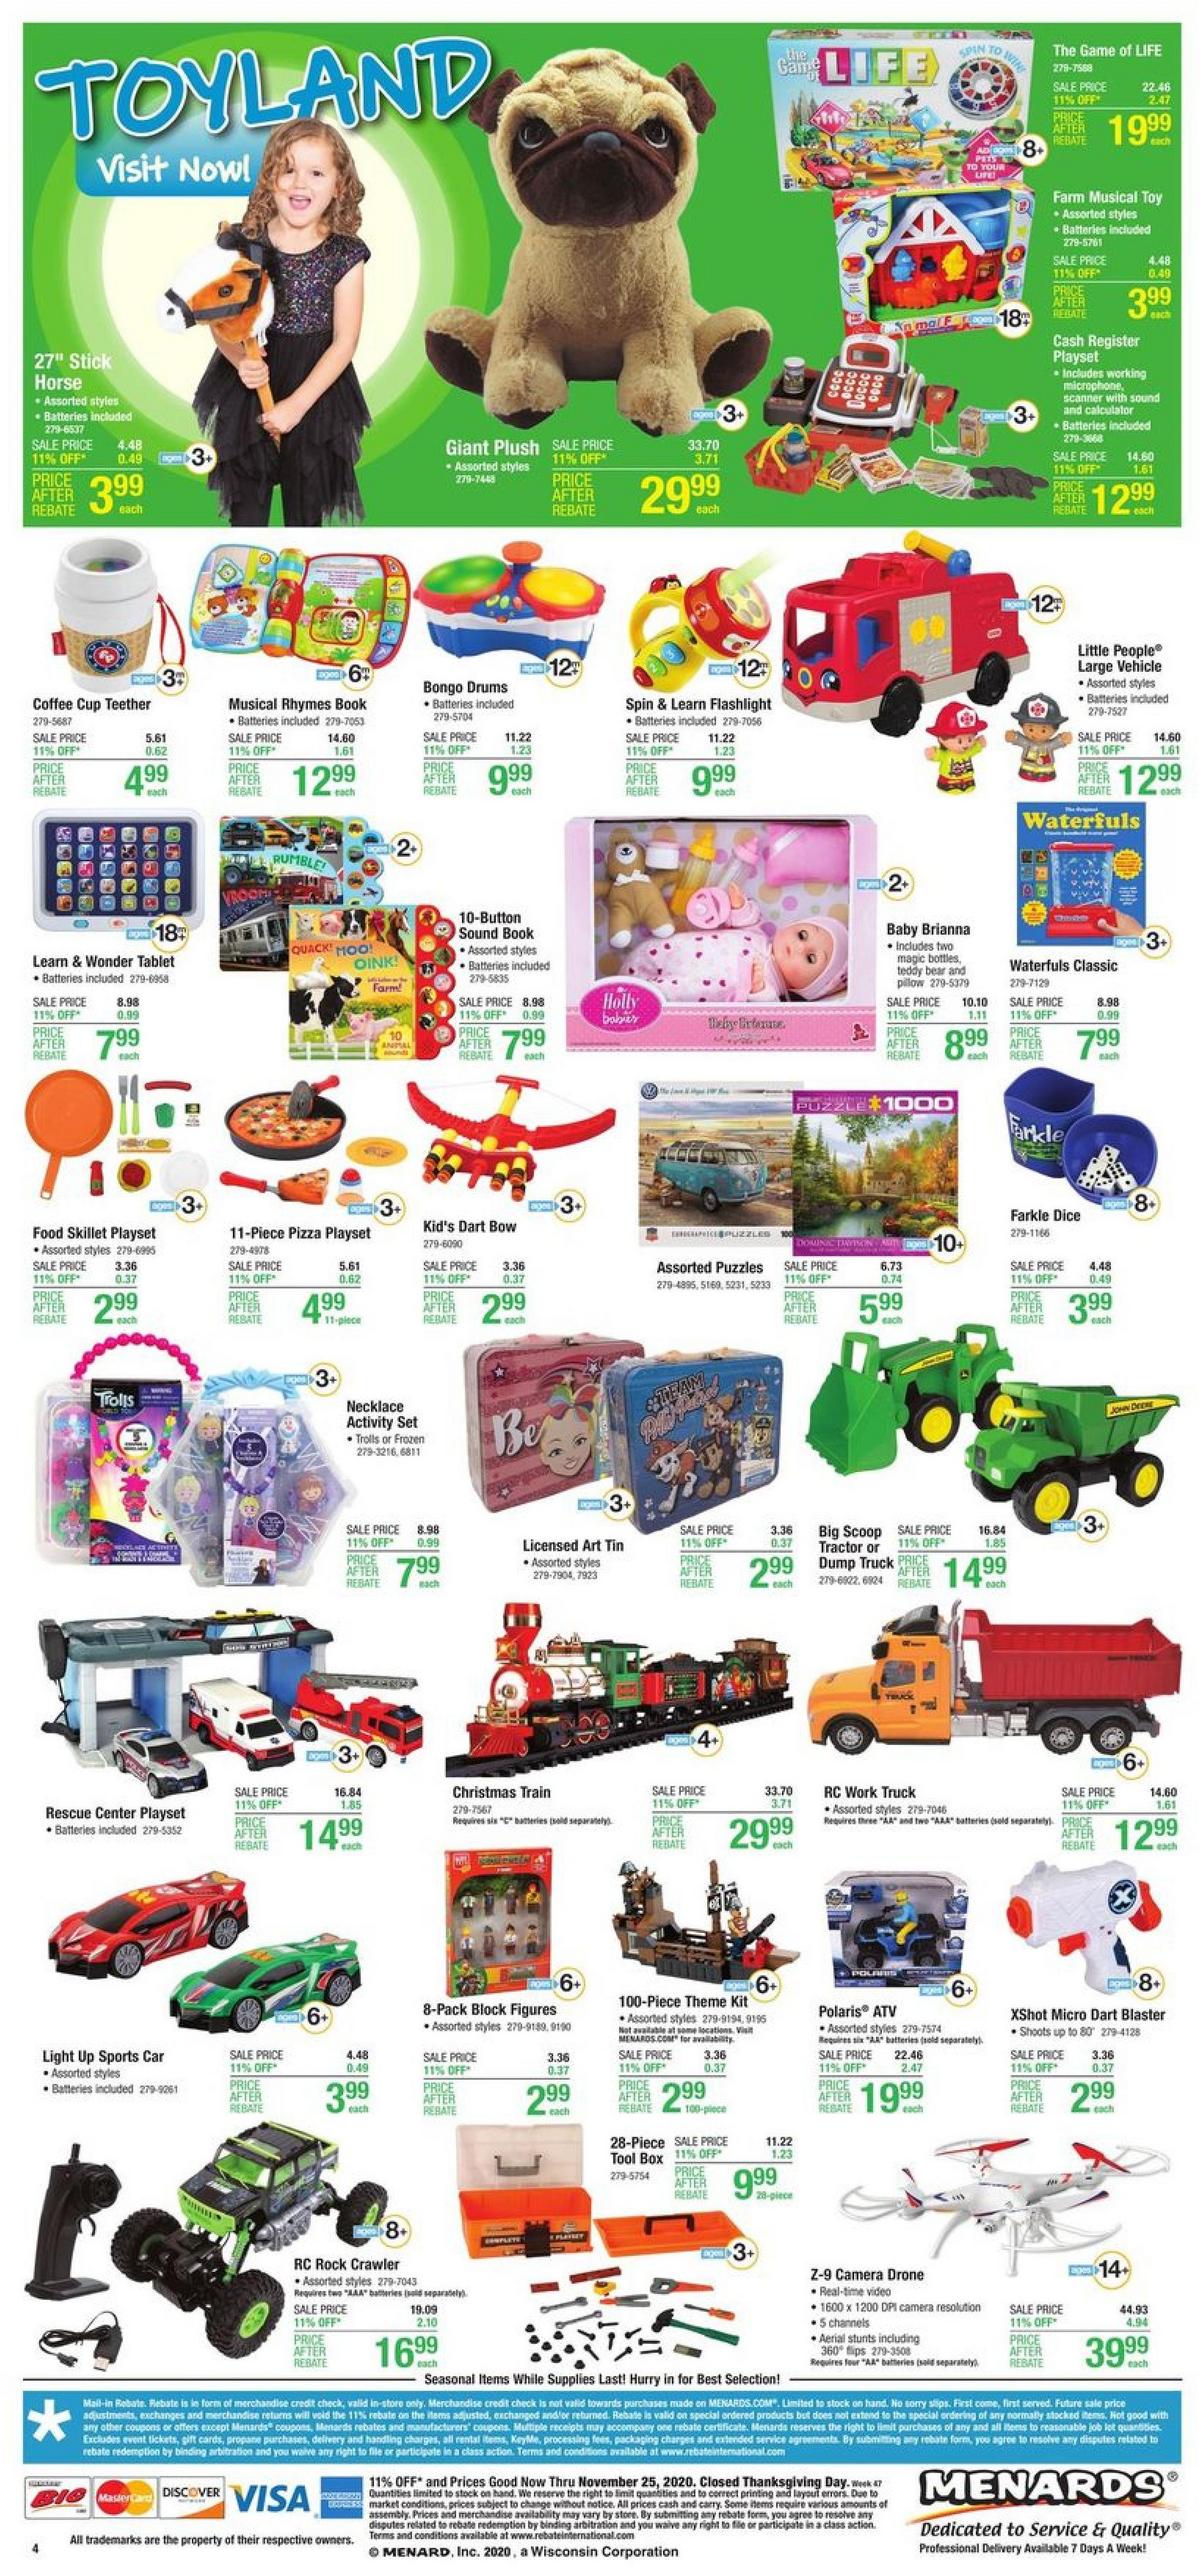 Menards Christmas Decor Sale Weekly Ad from November 15